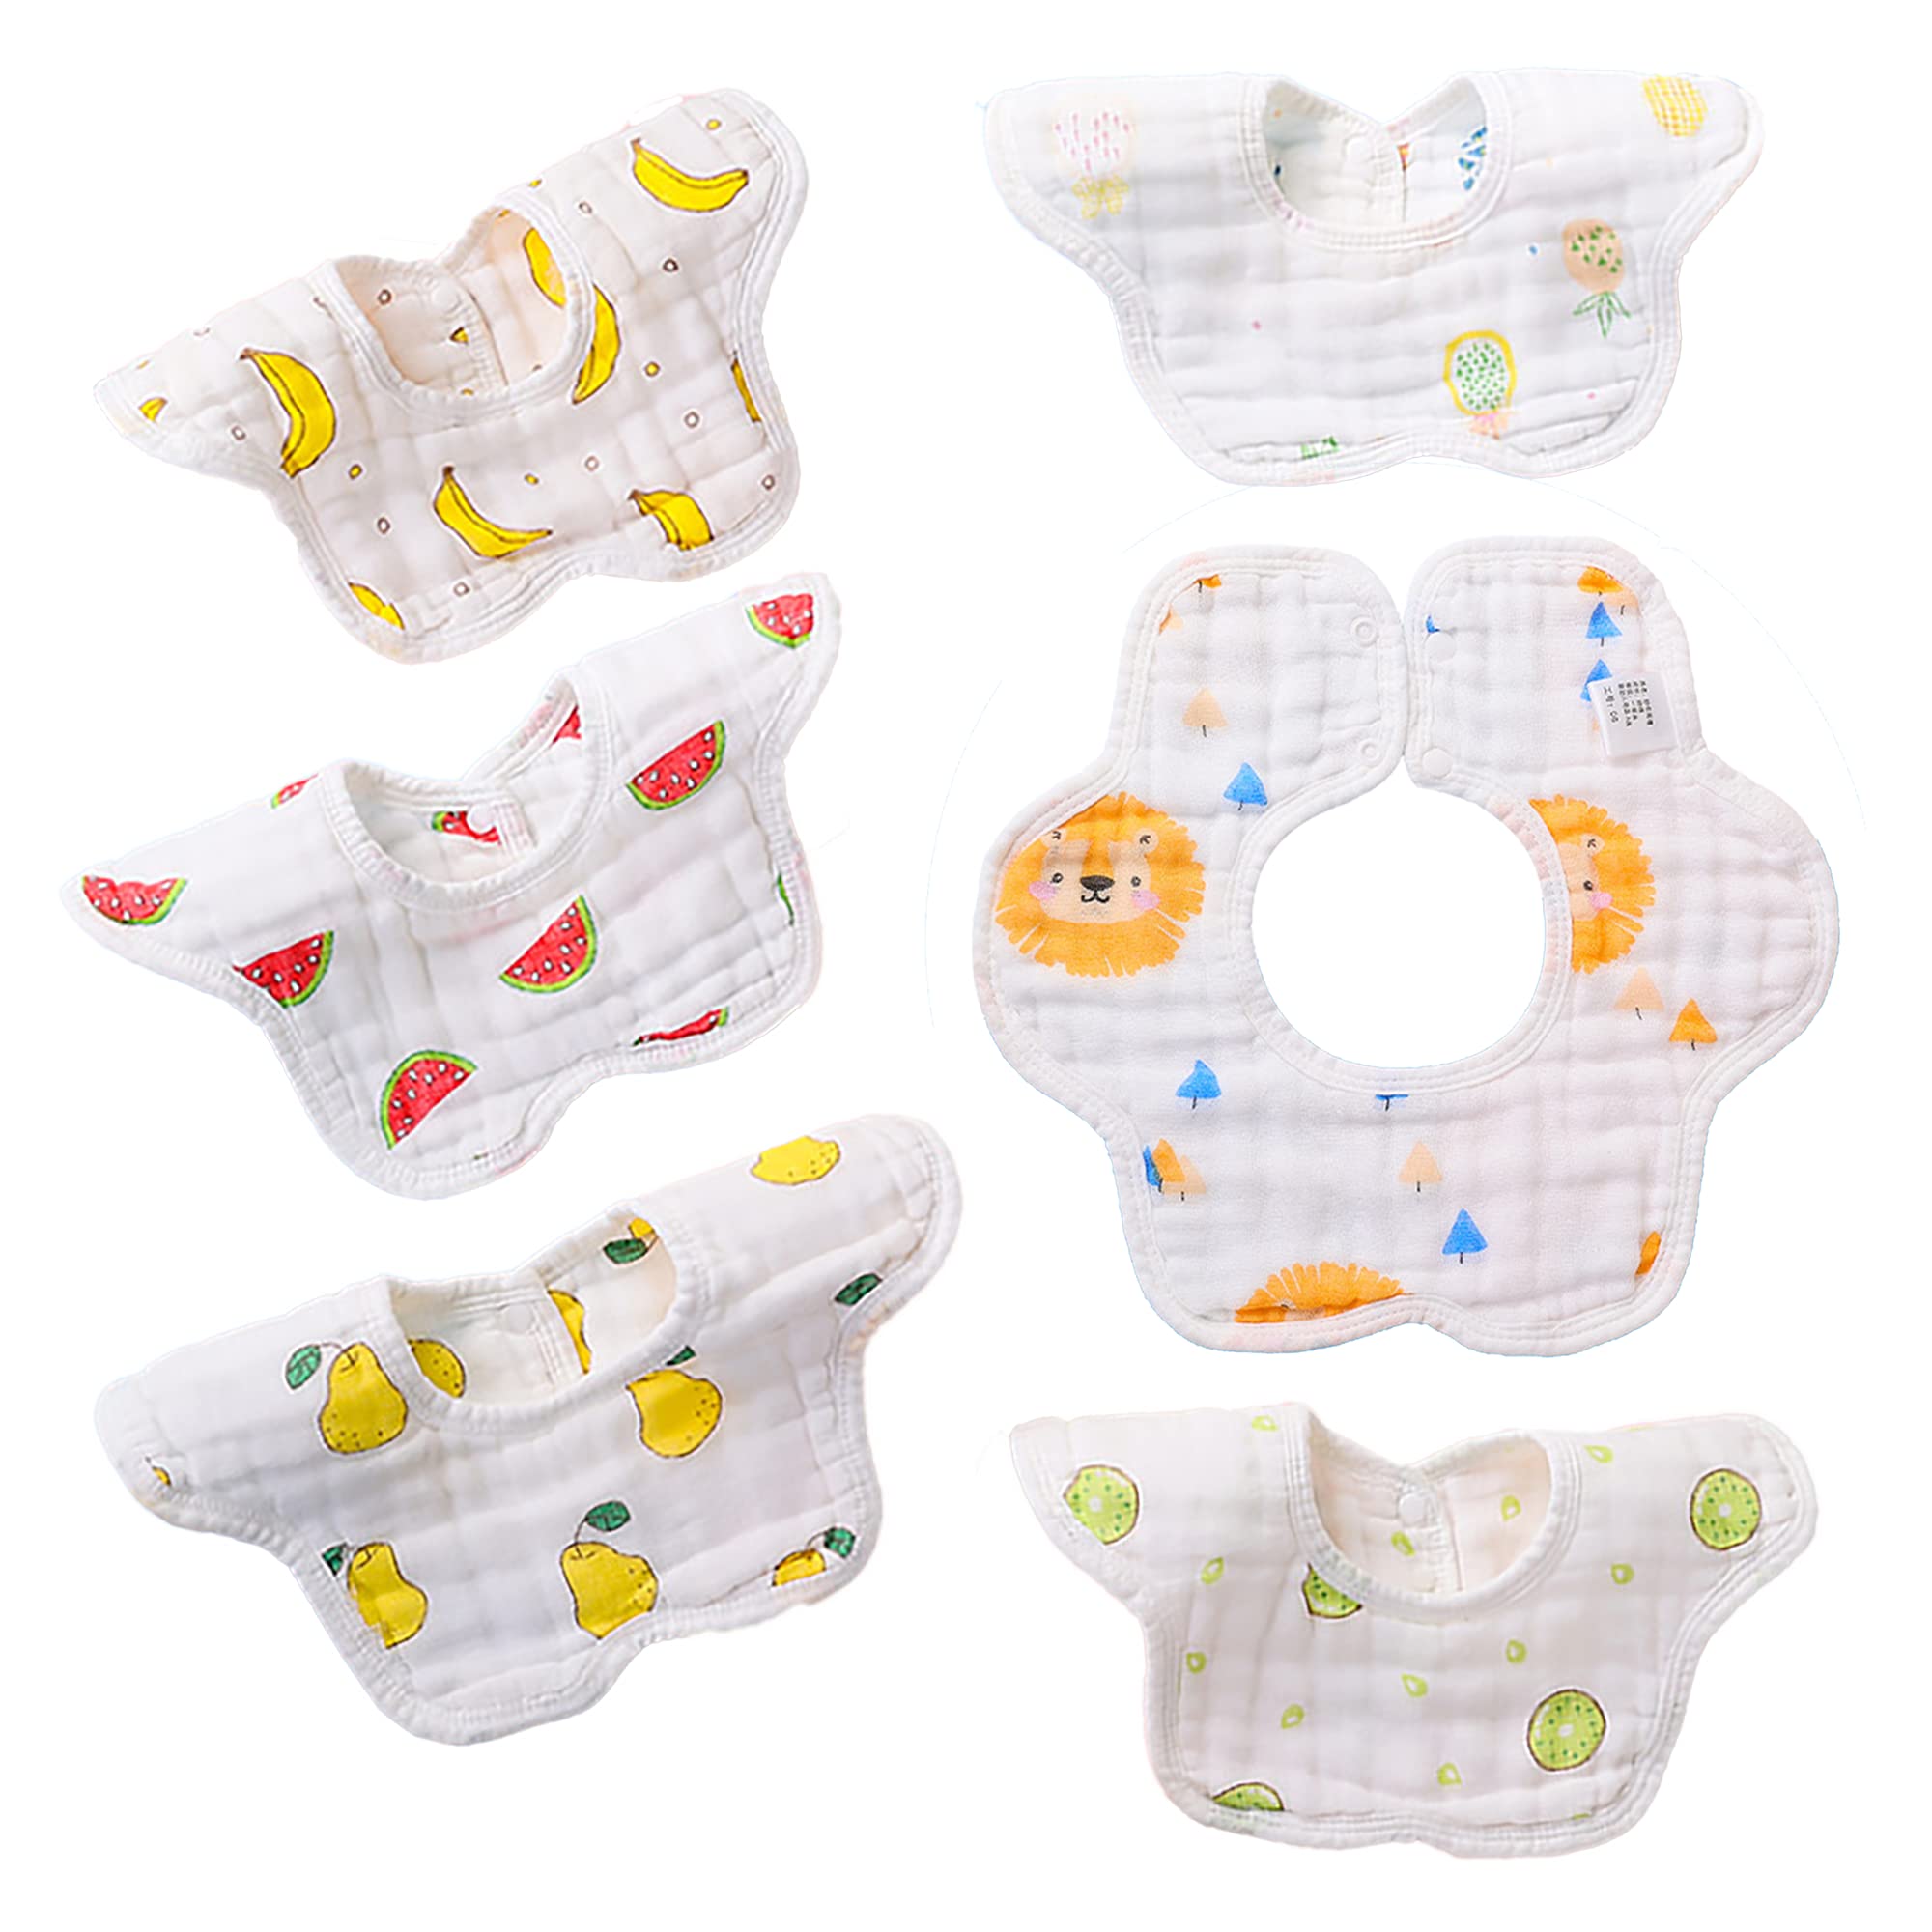 Vivana Sports 360 ​​° Rotate Soft Bibs for Baby Boys Girls Anti-Stain and Odor Resistant , Breathable , Comfortable , Neck Baby Bibs (6pcs)